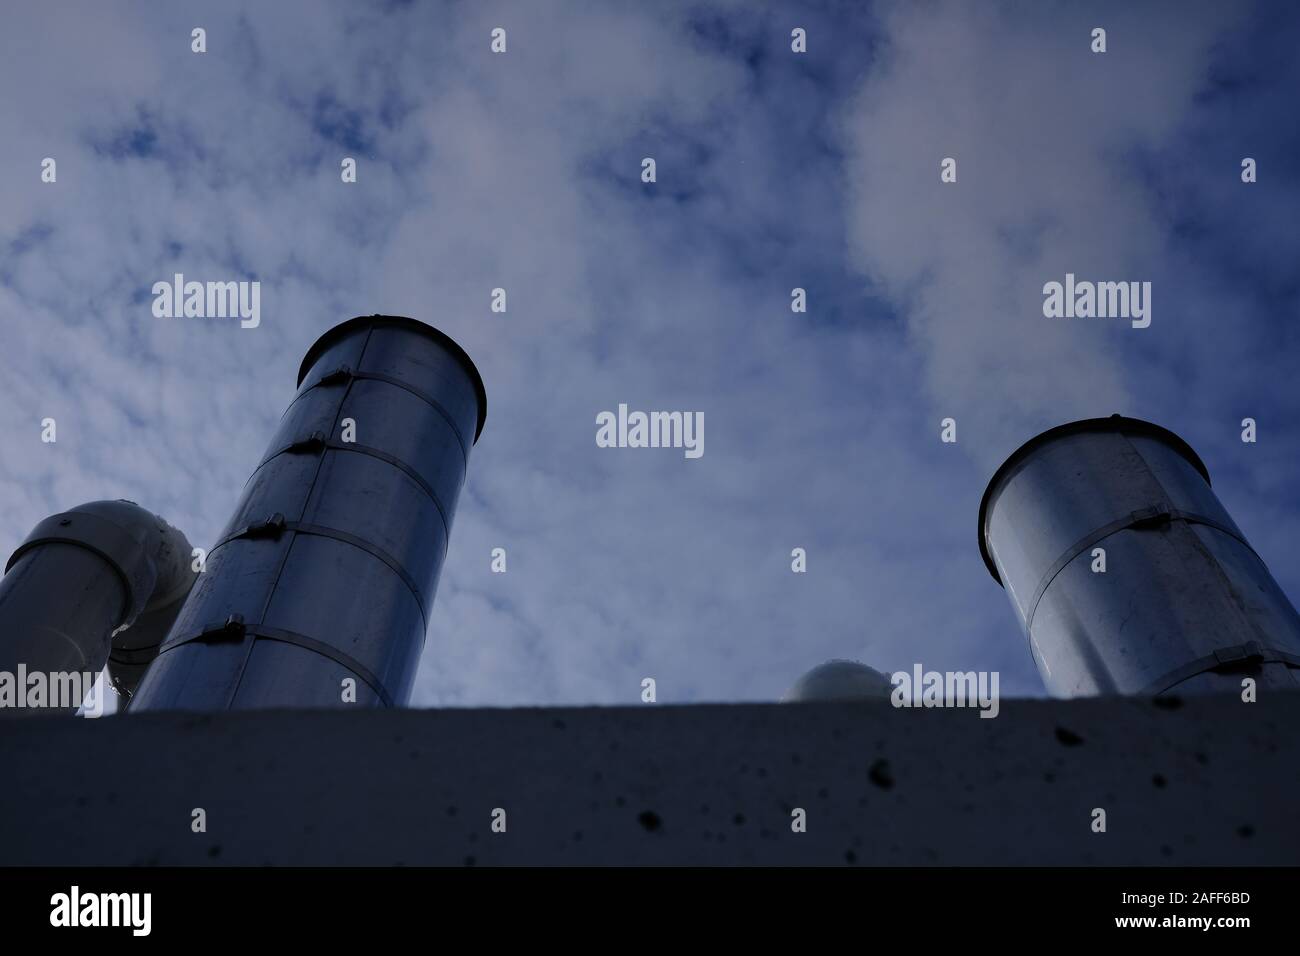 Steel exhaust / heat exchange chimneys on the top of a garage, against a cloudy blue sky. Ottawa, Ontario, Canada. Stock Photo